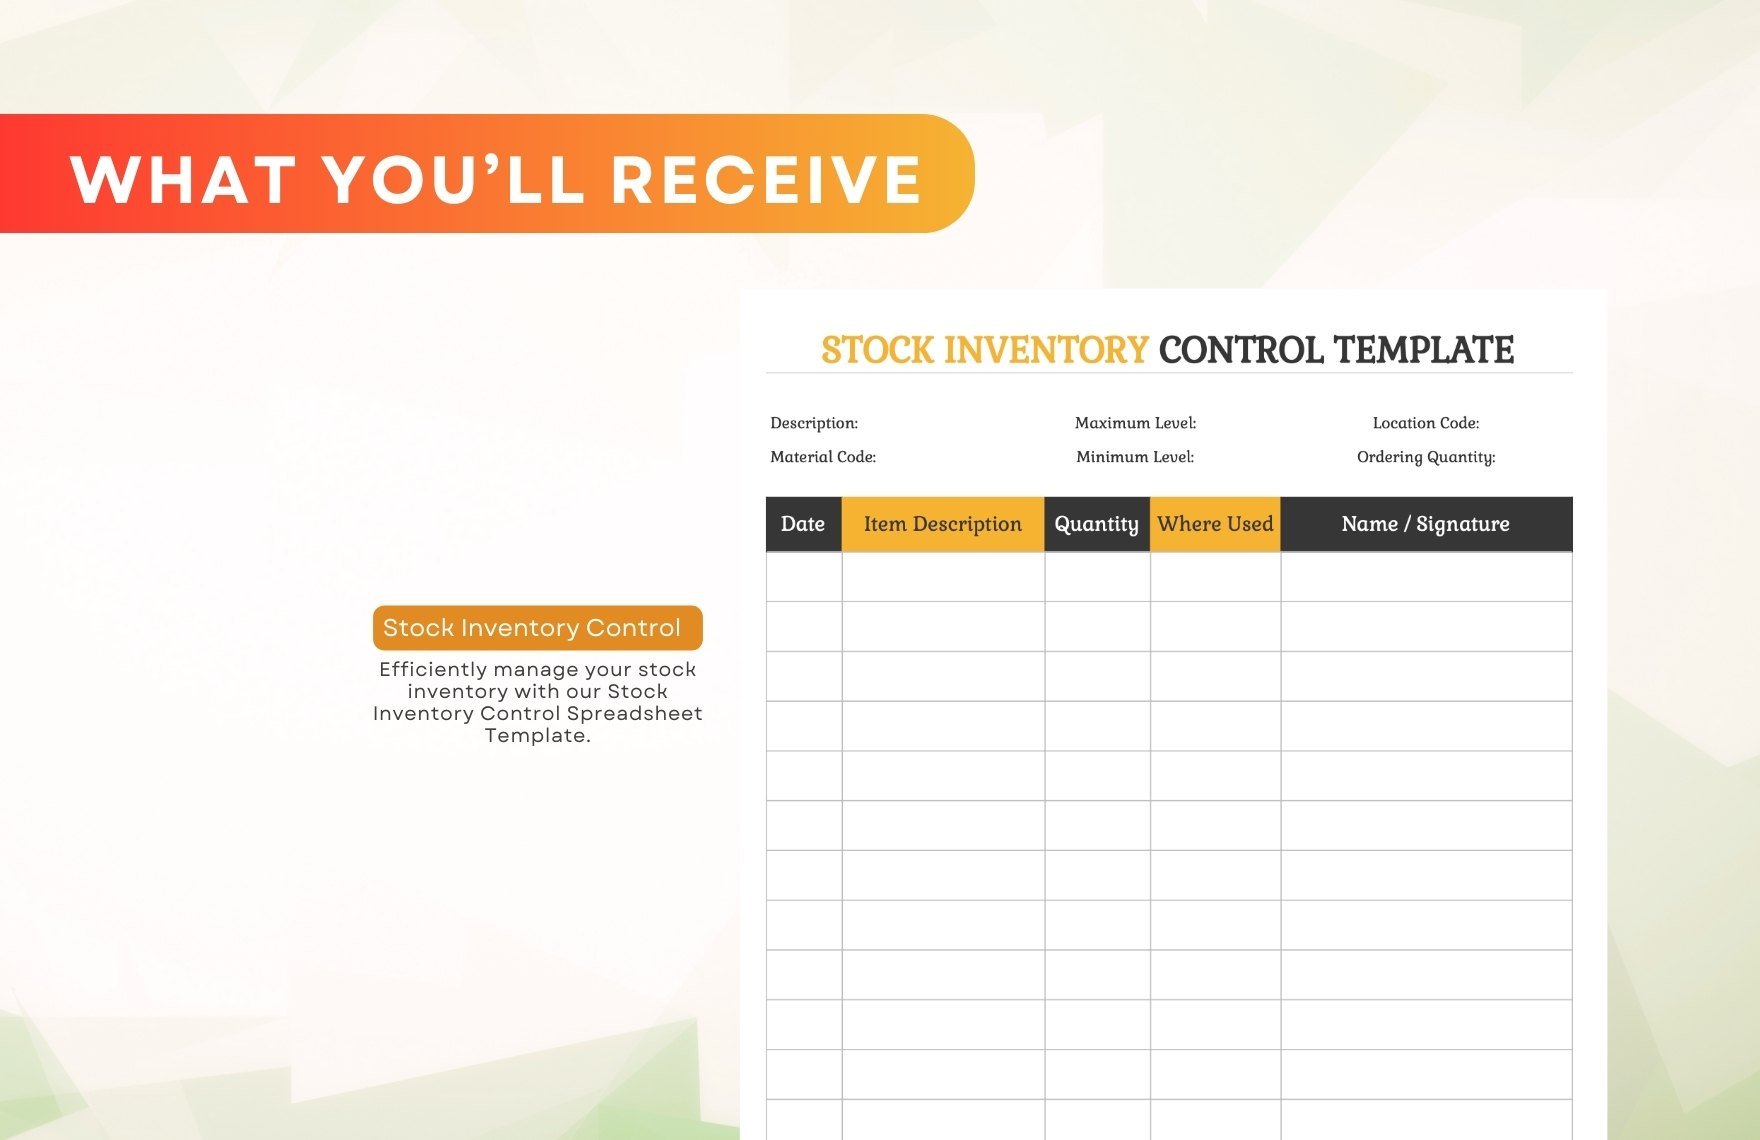 Stock Inventory Control Spreadsheet Template